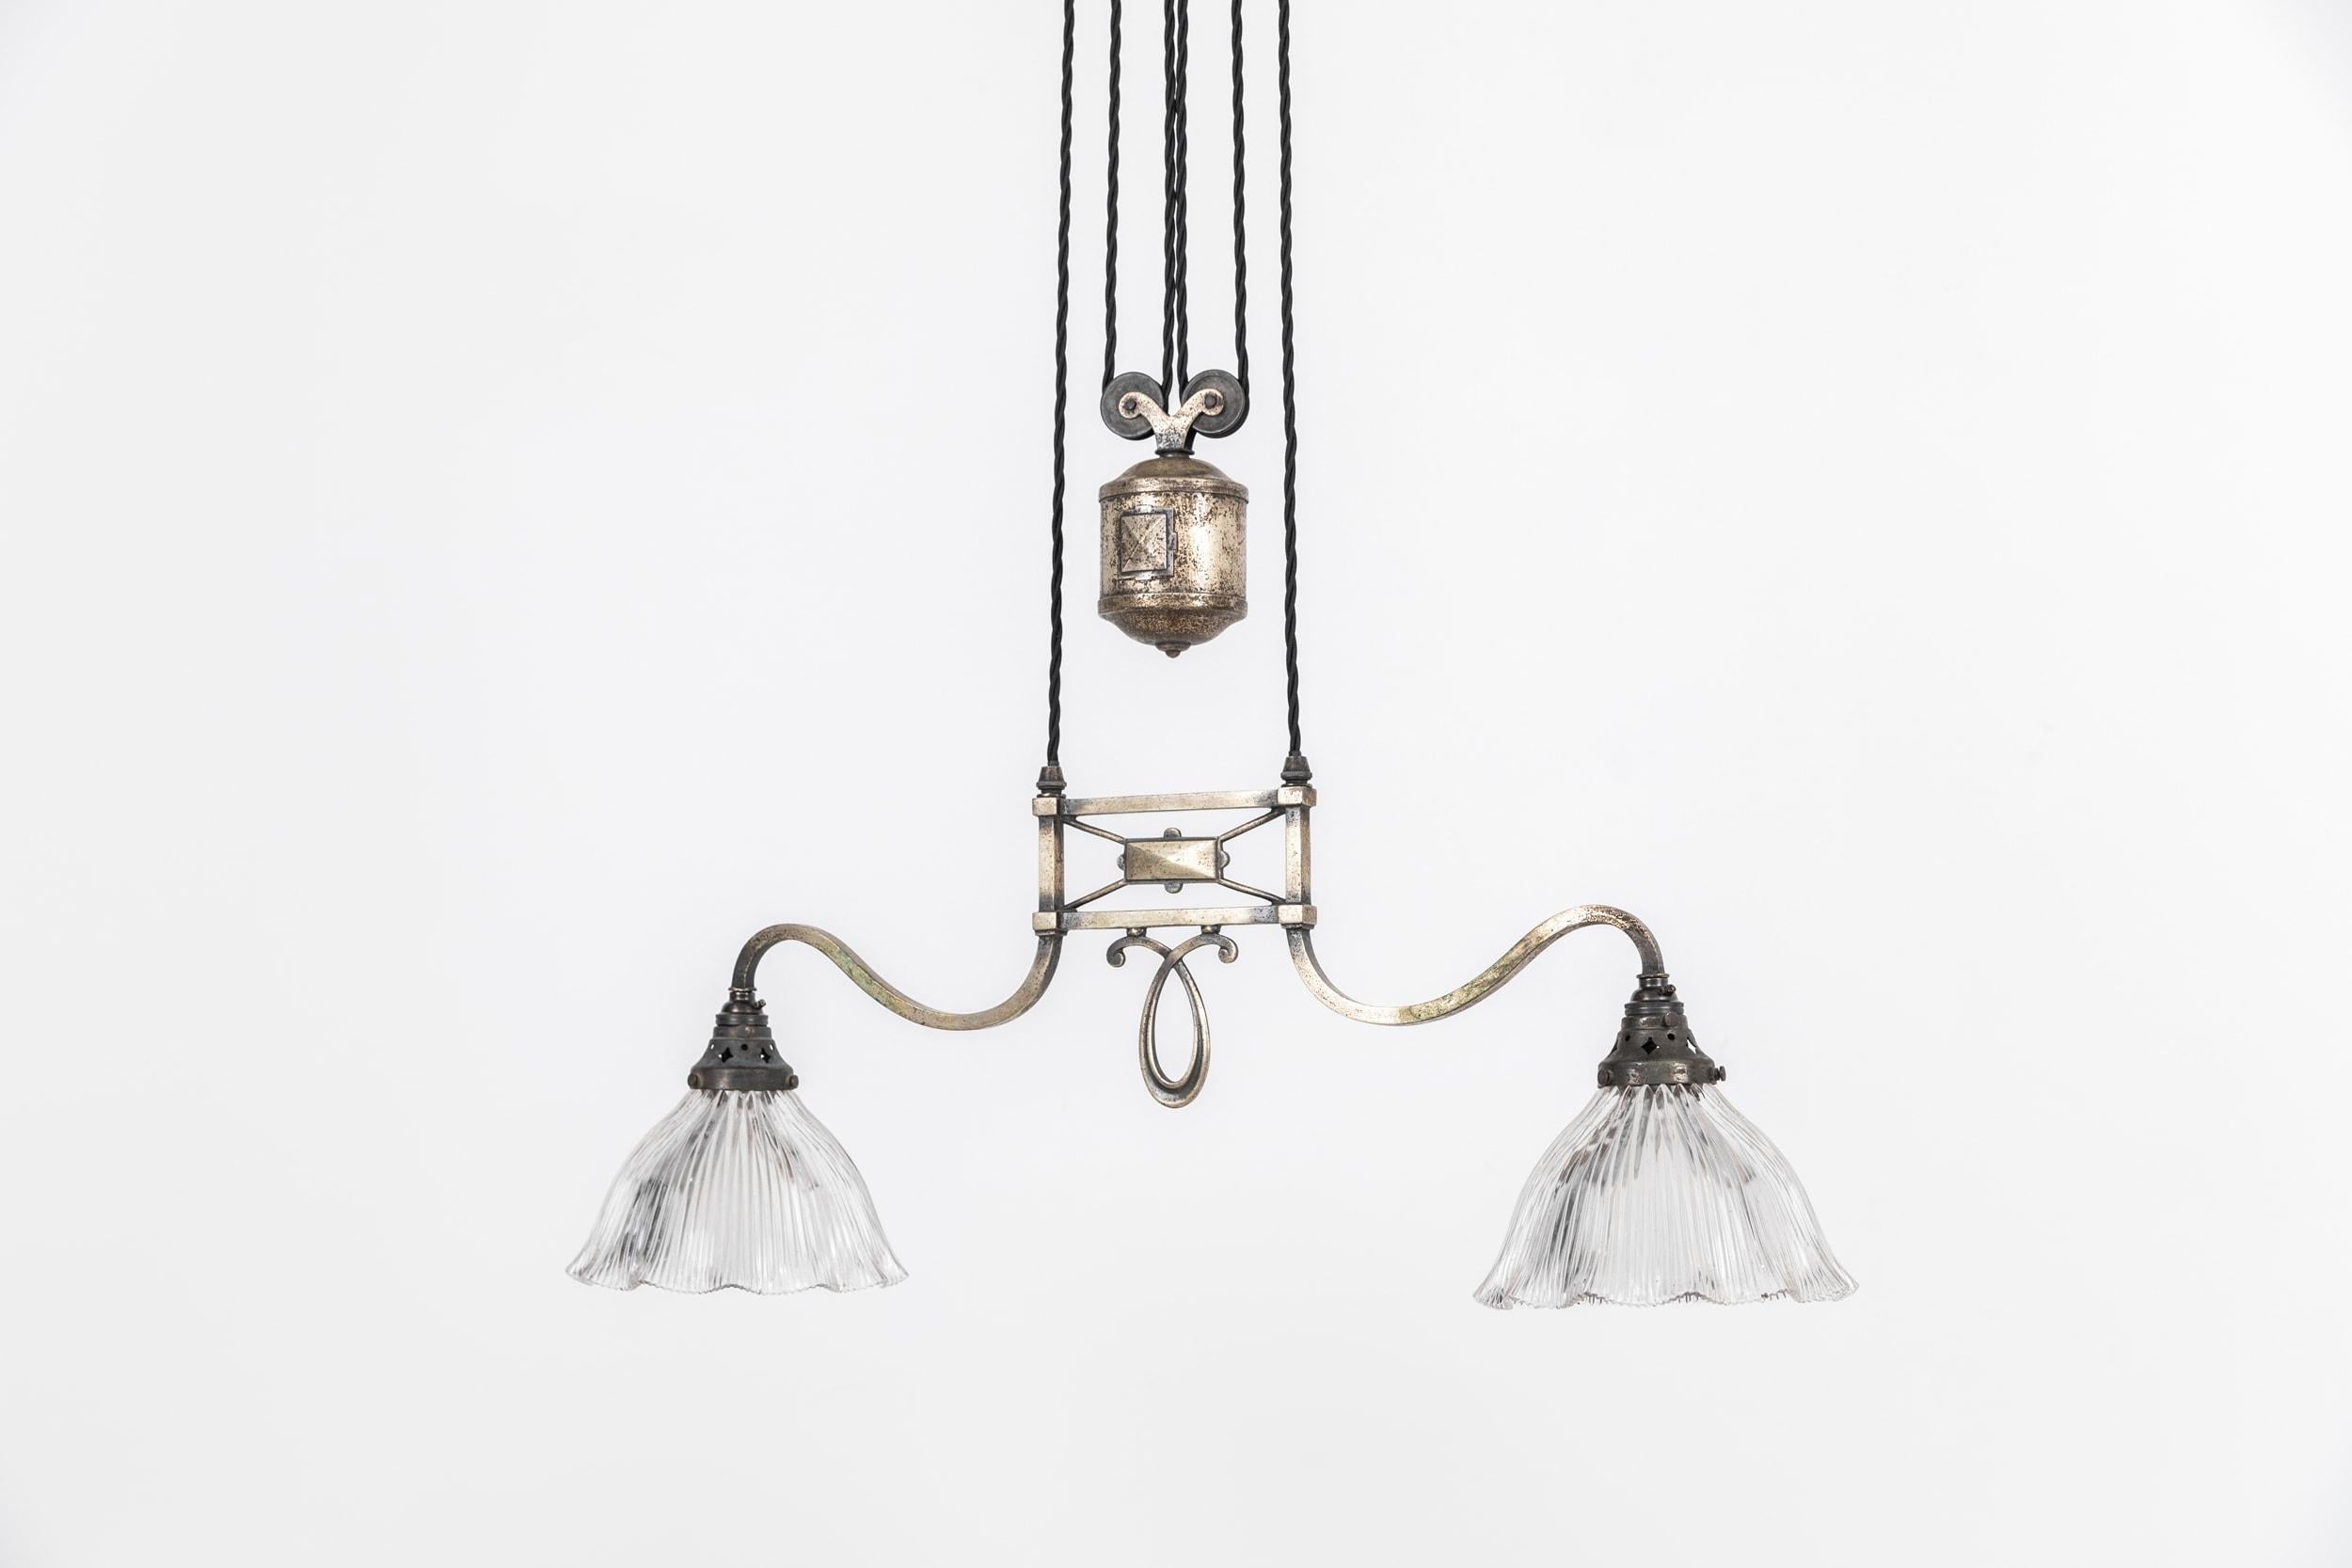 Silver Plate Antique Art Deco GEC Rise and Fall Prismatic Glass Ceiling Light Lamp, c.1930